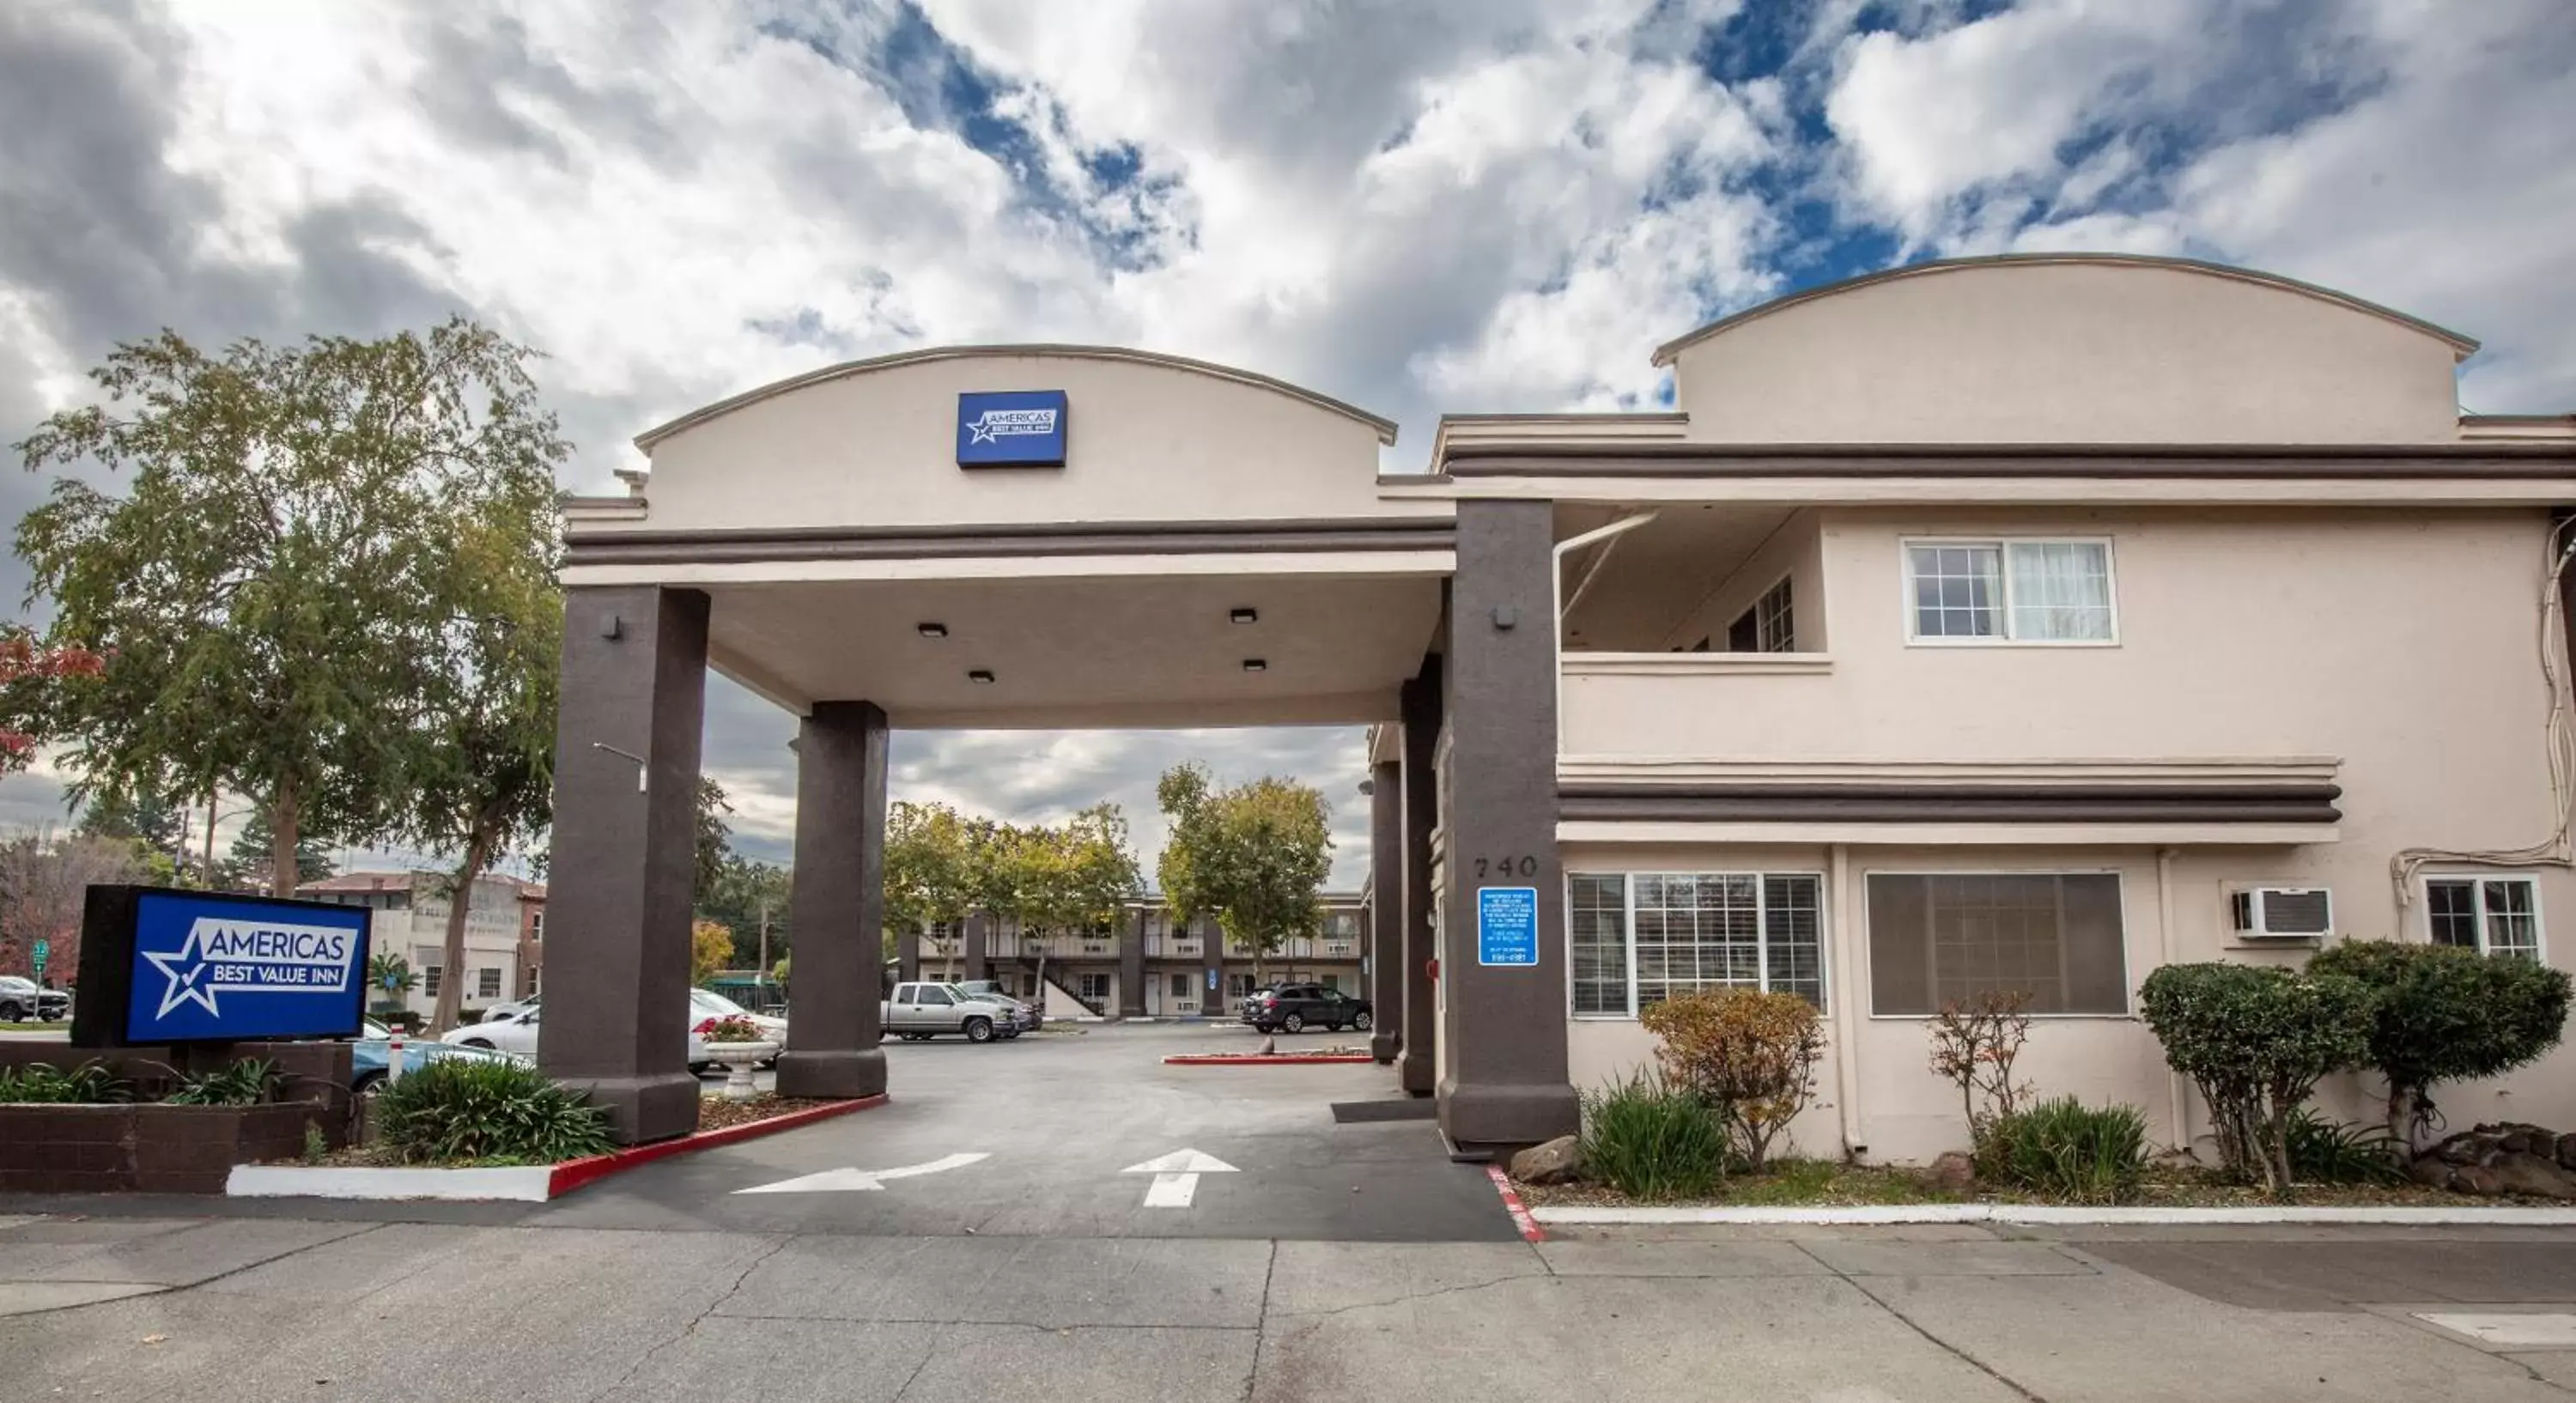 Property Building in Americas Best Value Inn - Chico